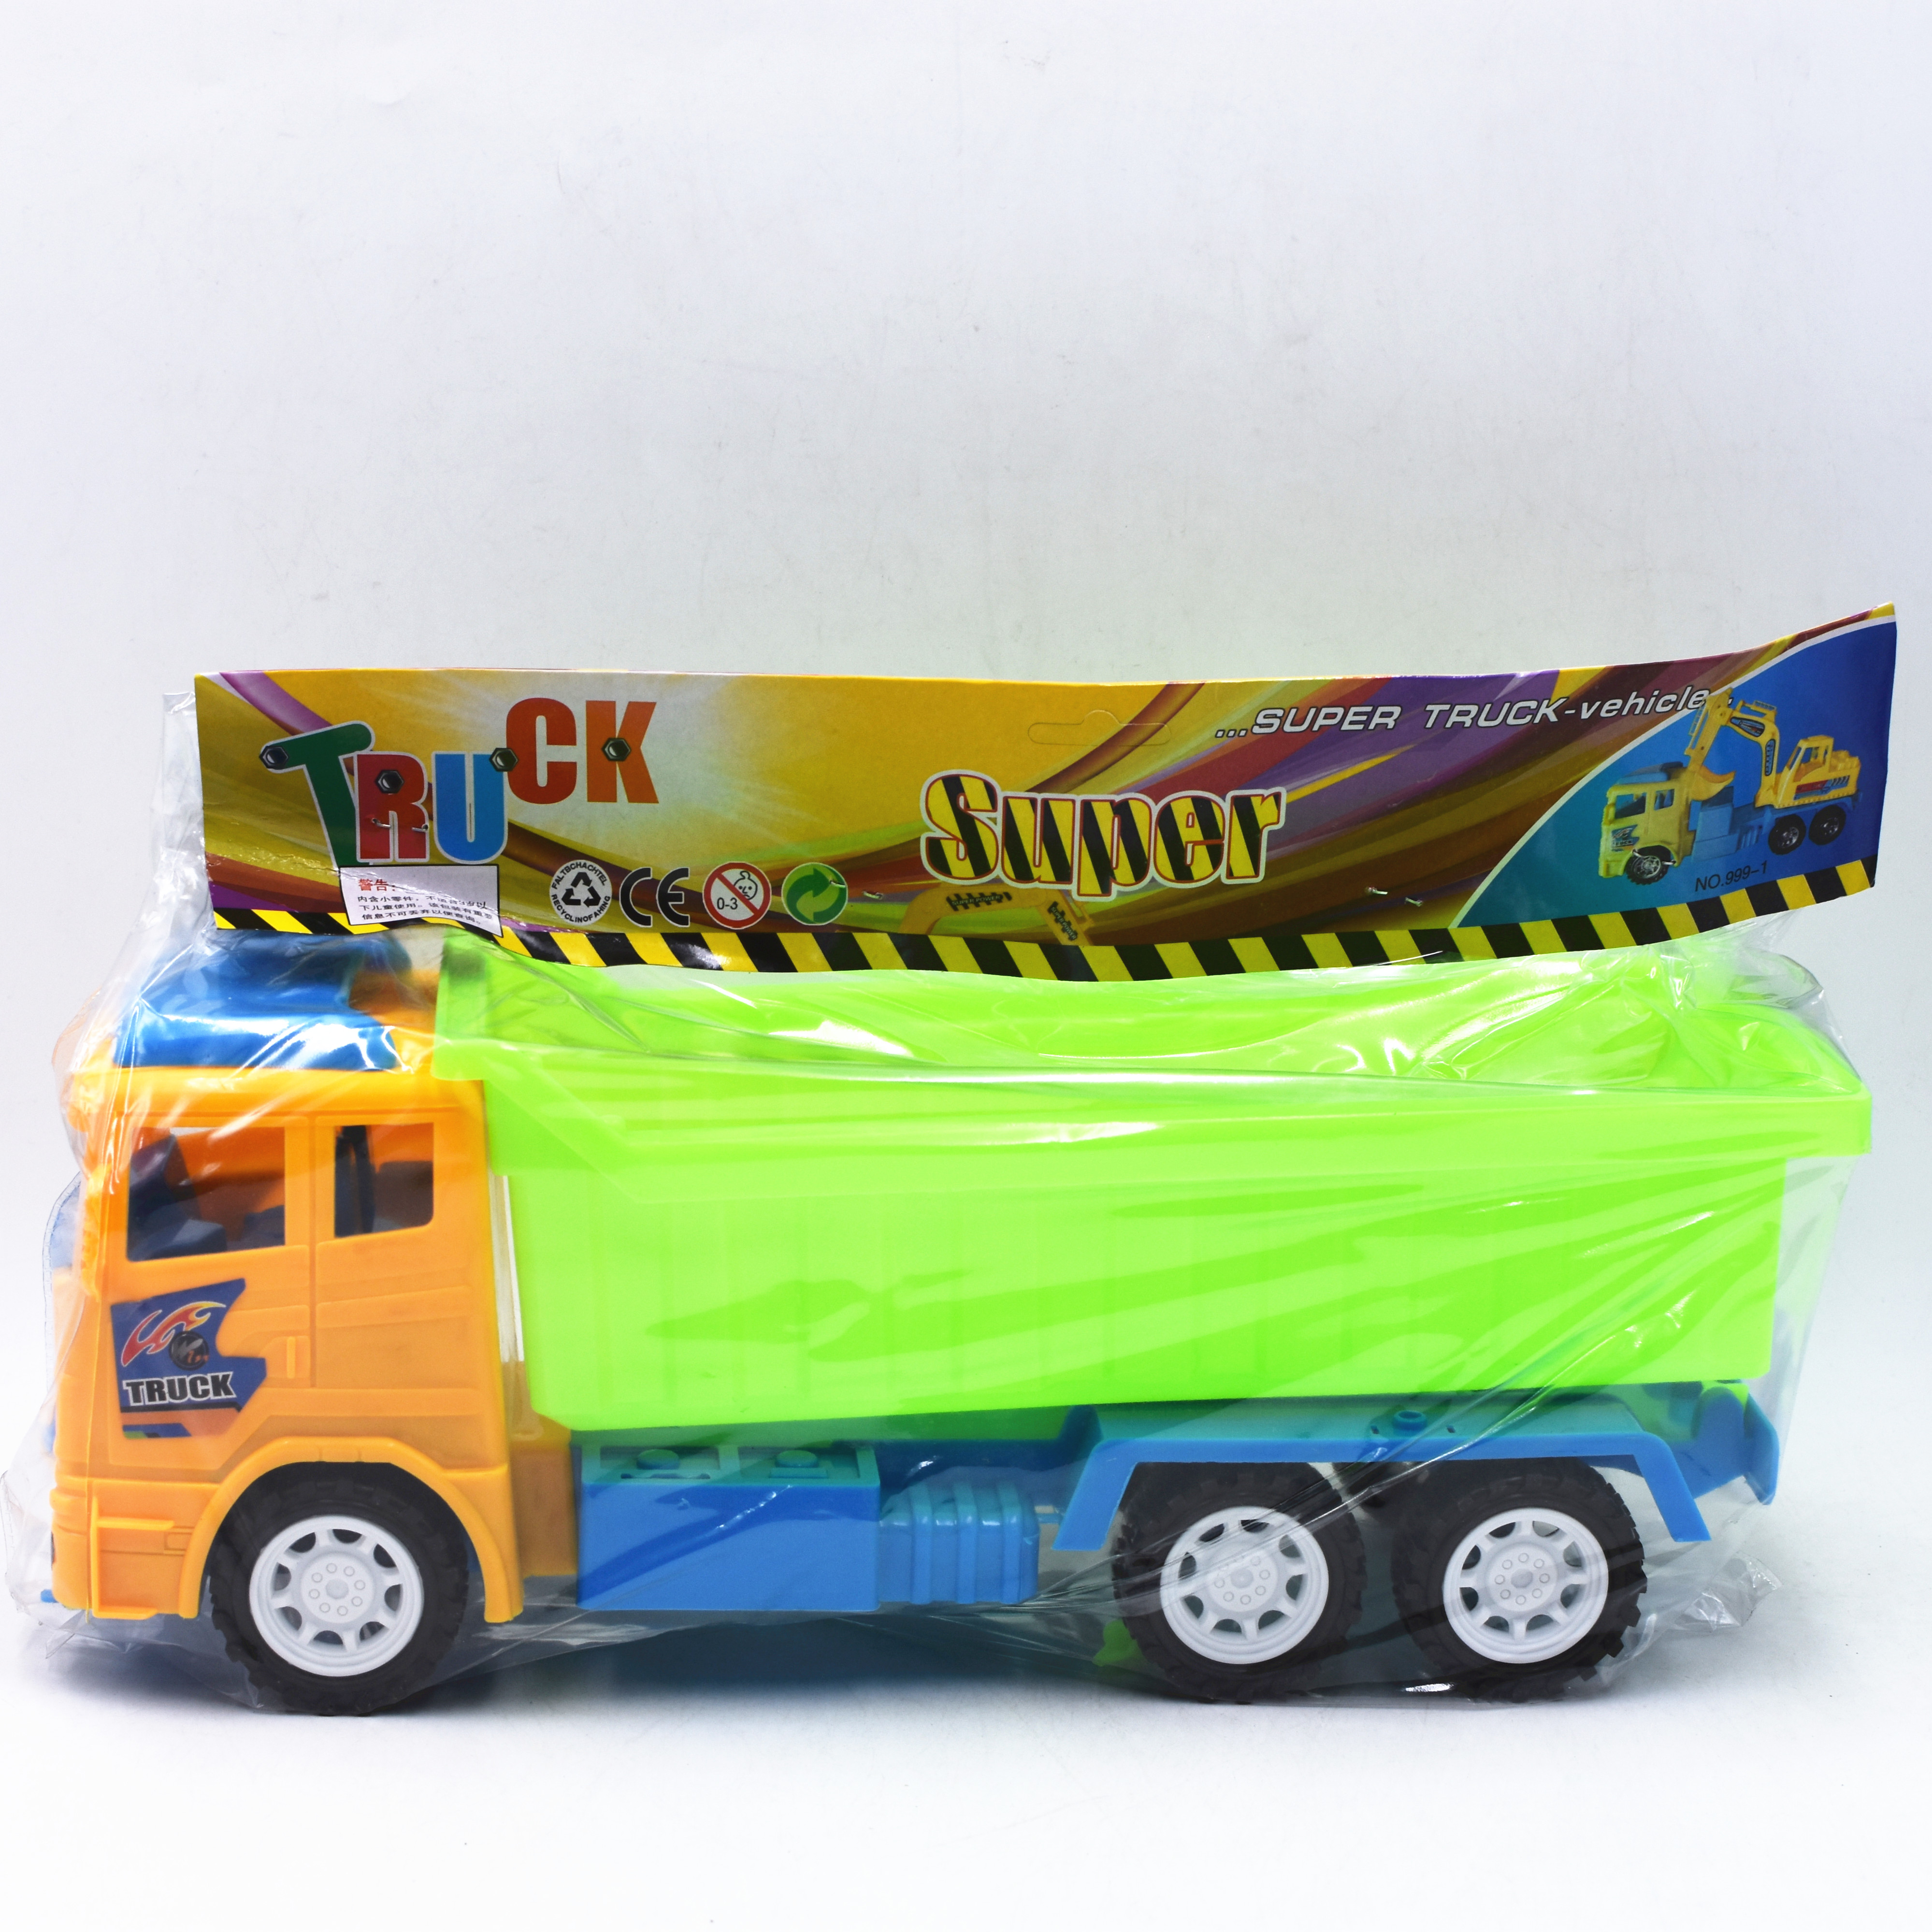 FREE WHEEL TRUCK TOY LY1737